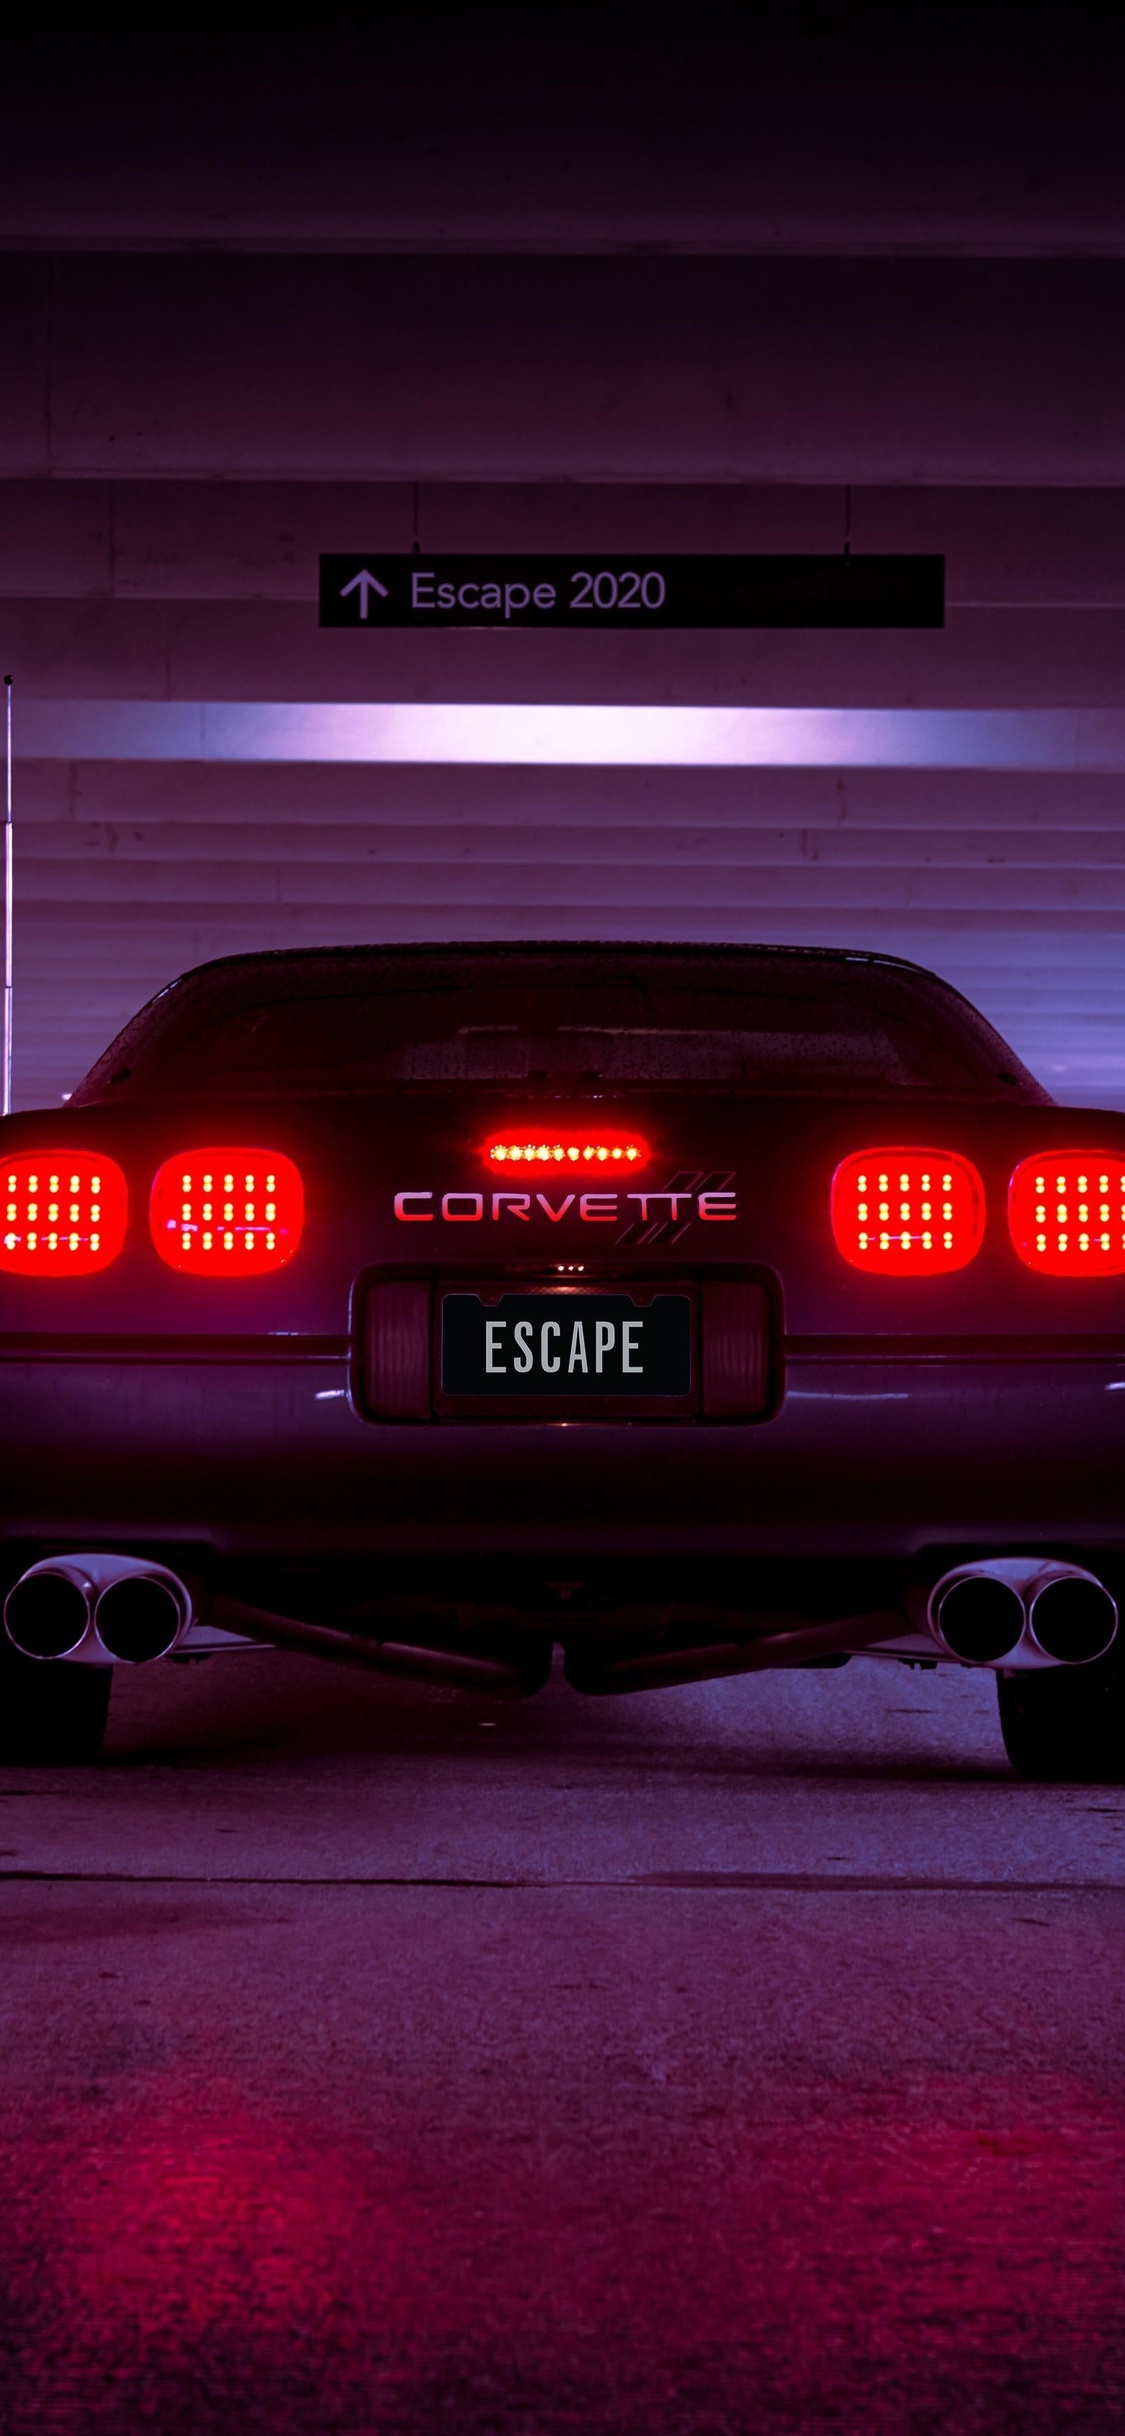 Corevette C4 Escape 2020 Retrowave iPhone XS, iPhone iPhone X HD 4k Wallpaper, Image, Background, Photo and Picture